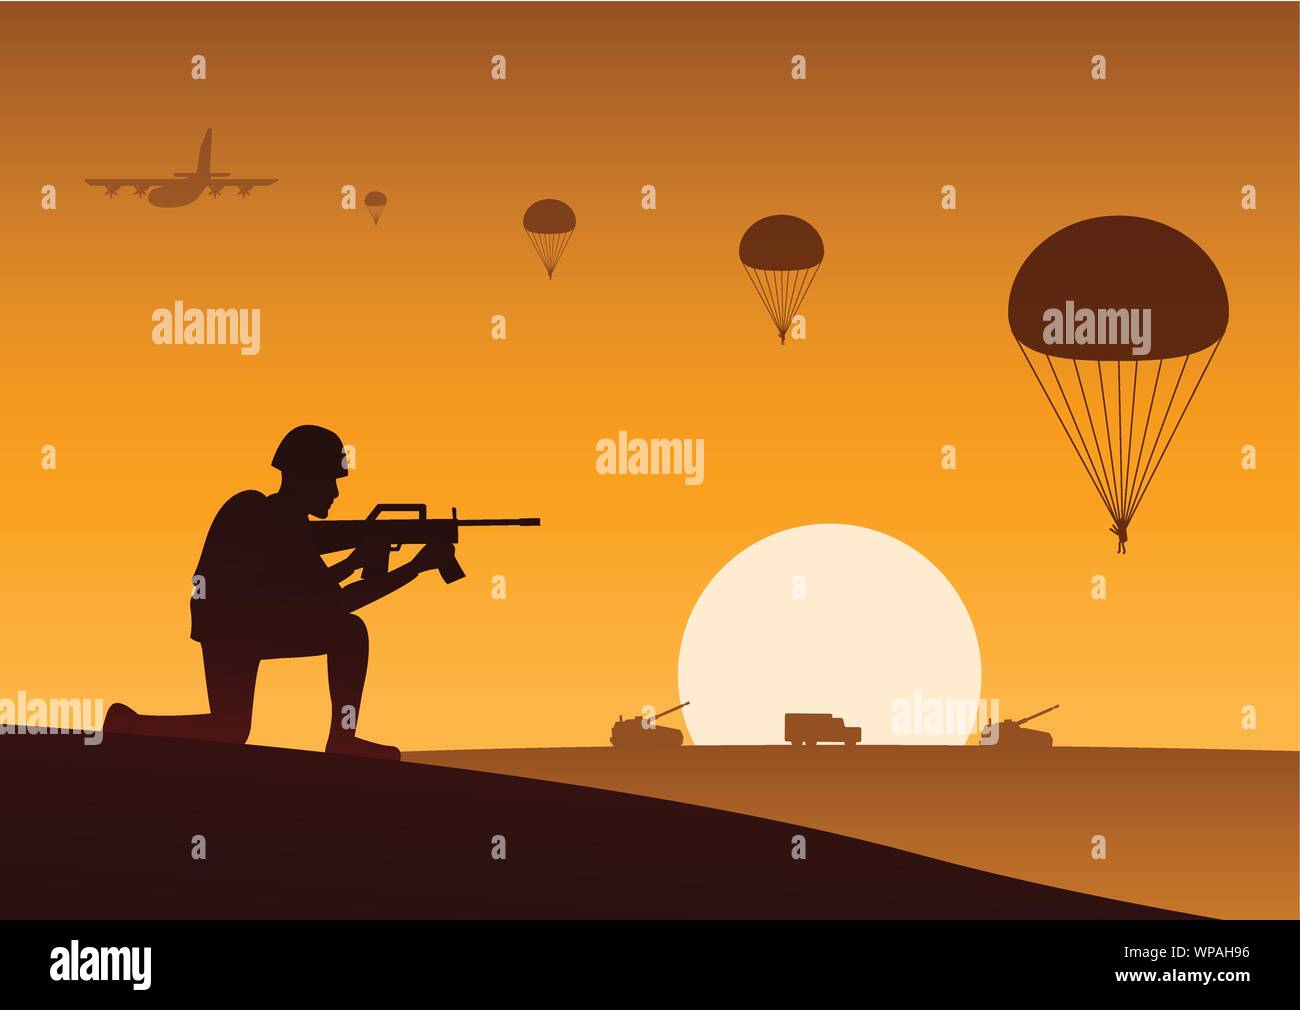 soldier ready to shoot paratrooper down behind military vehicle ahead to target Stock Vector